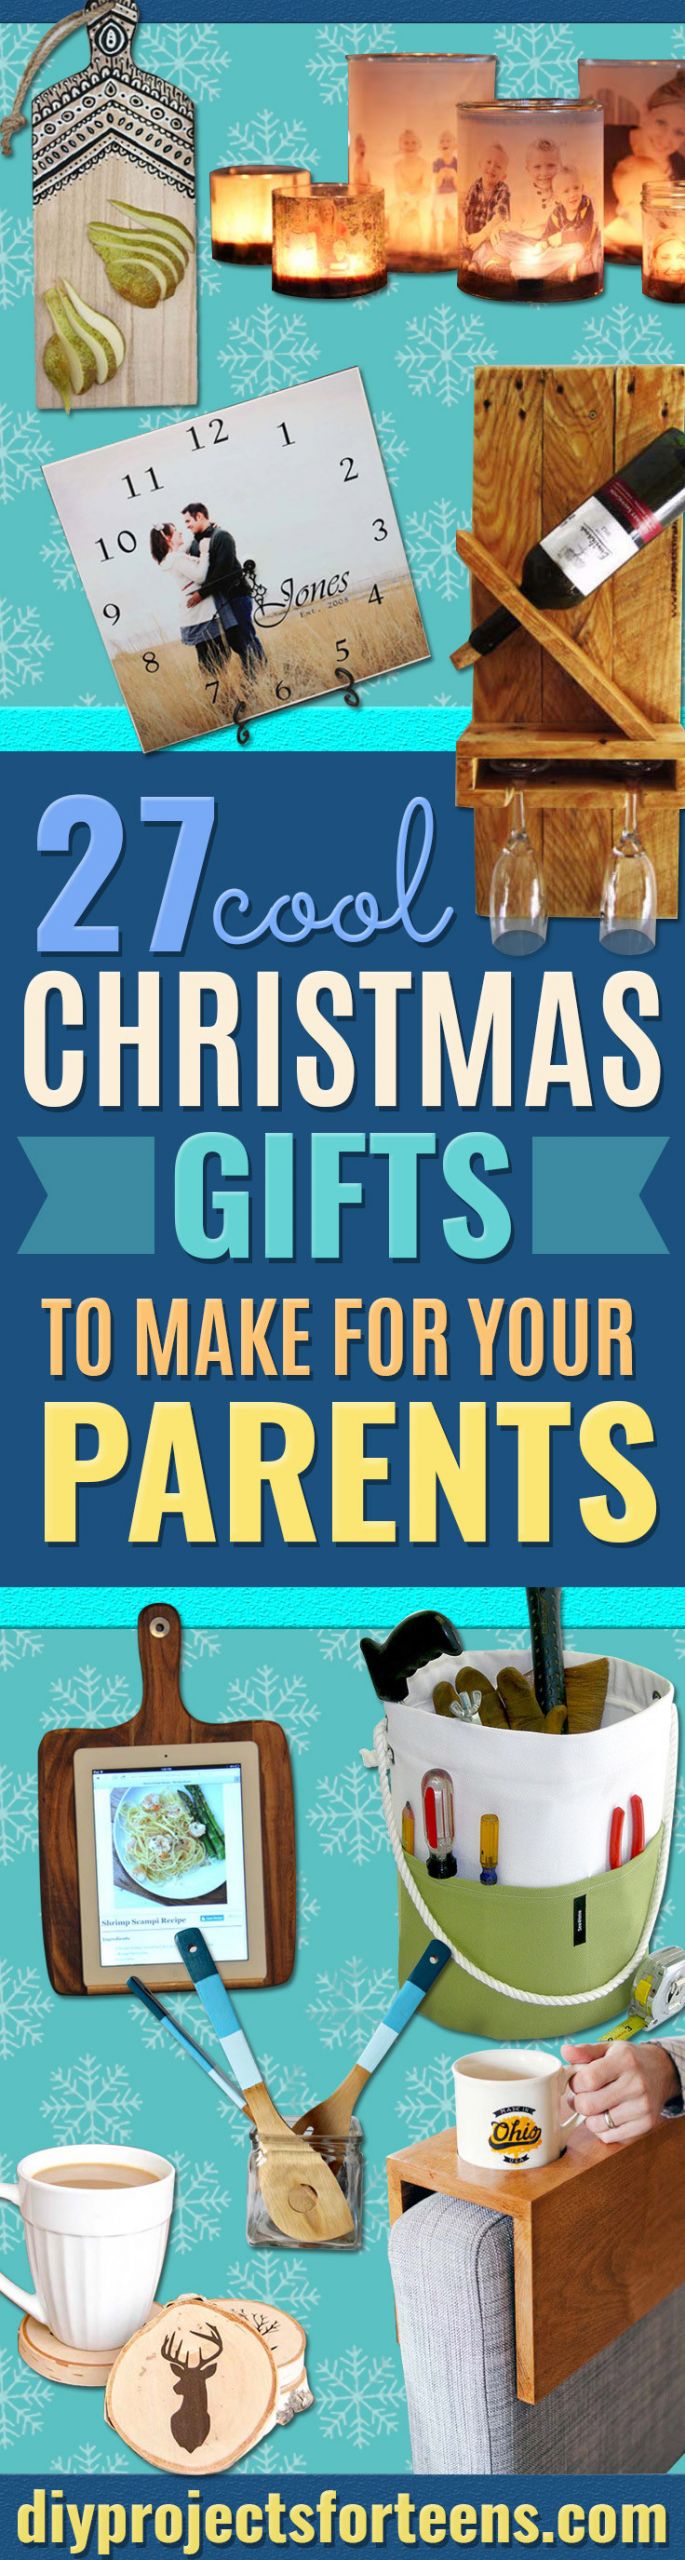 Christmas Gift Ideas For Parents
 Cool Christmas Gifts To Make For Your Parents